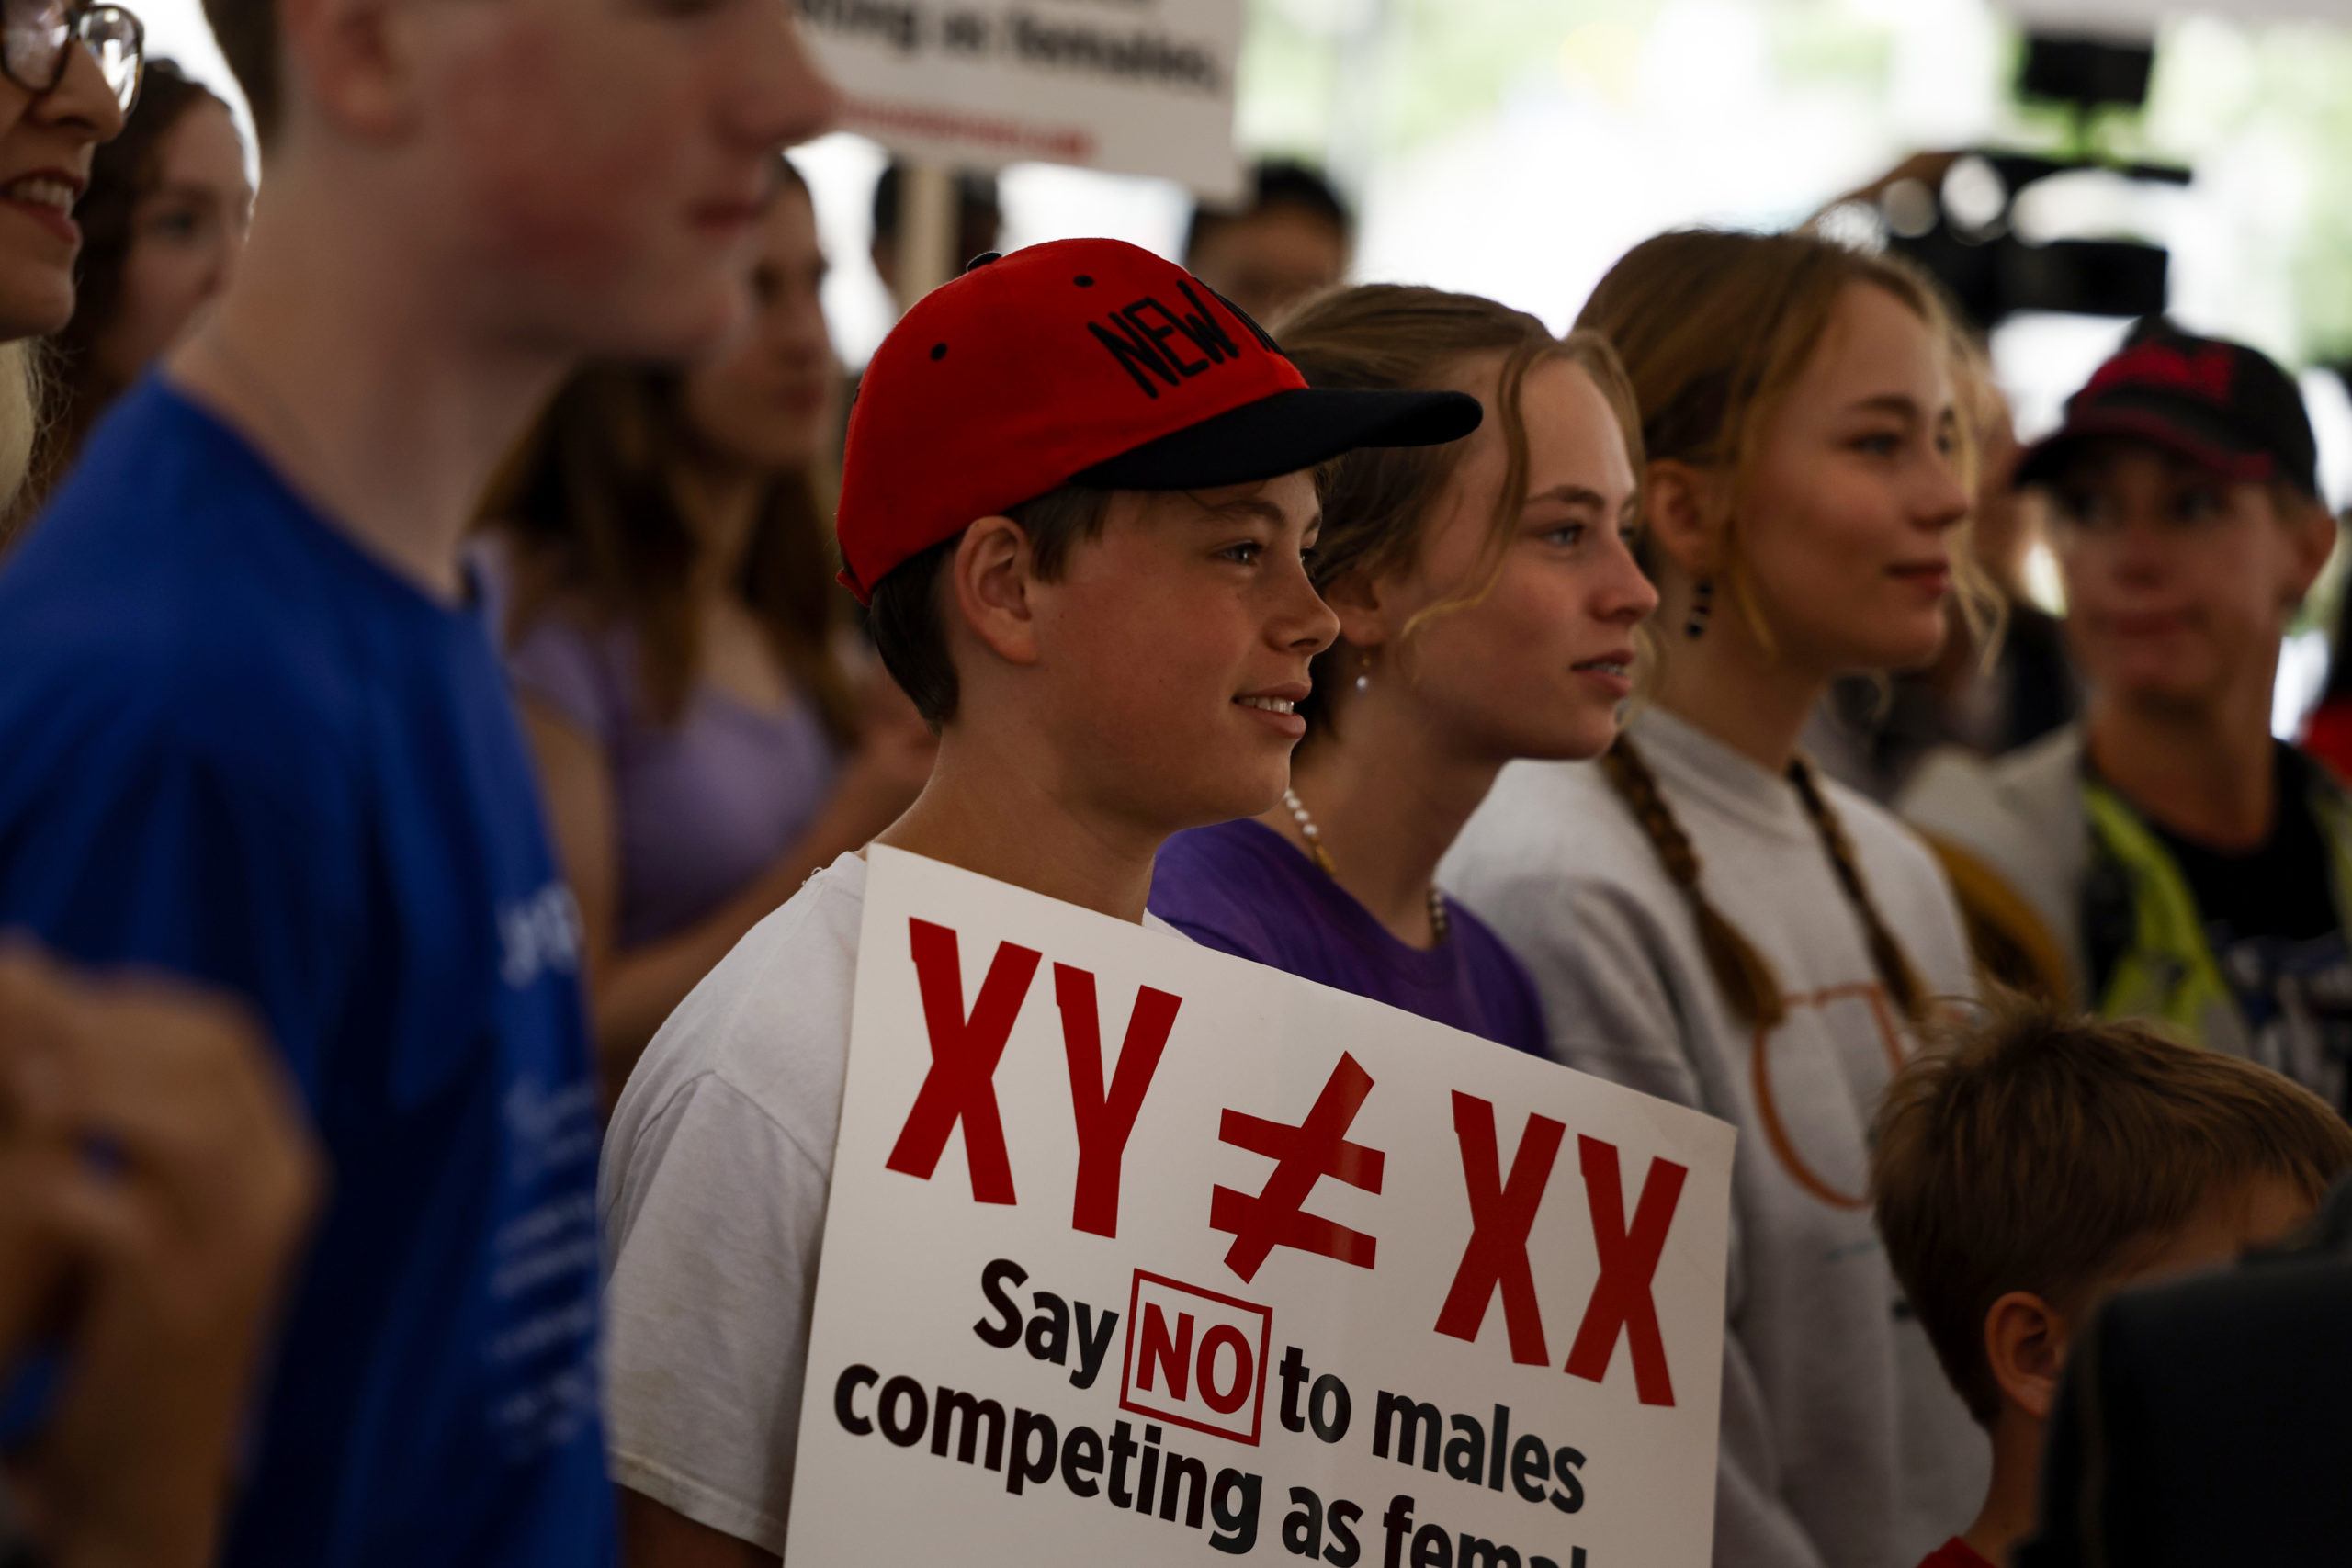 Demonstrators listen to the speaking program during an "Our Bodies, Our Sports" rally for the 50th anniversary of Title IX at Freedom Plaza on June 23, 2022 in Washington, DC. The rally, organized by multiple athletic women's groups was held to call on U.S. President Joe Biden to put restrictions on transgender females and "advocate to keep women's sports female."(Photo by Anna Moneymaker/Getty Images)